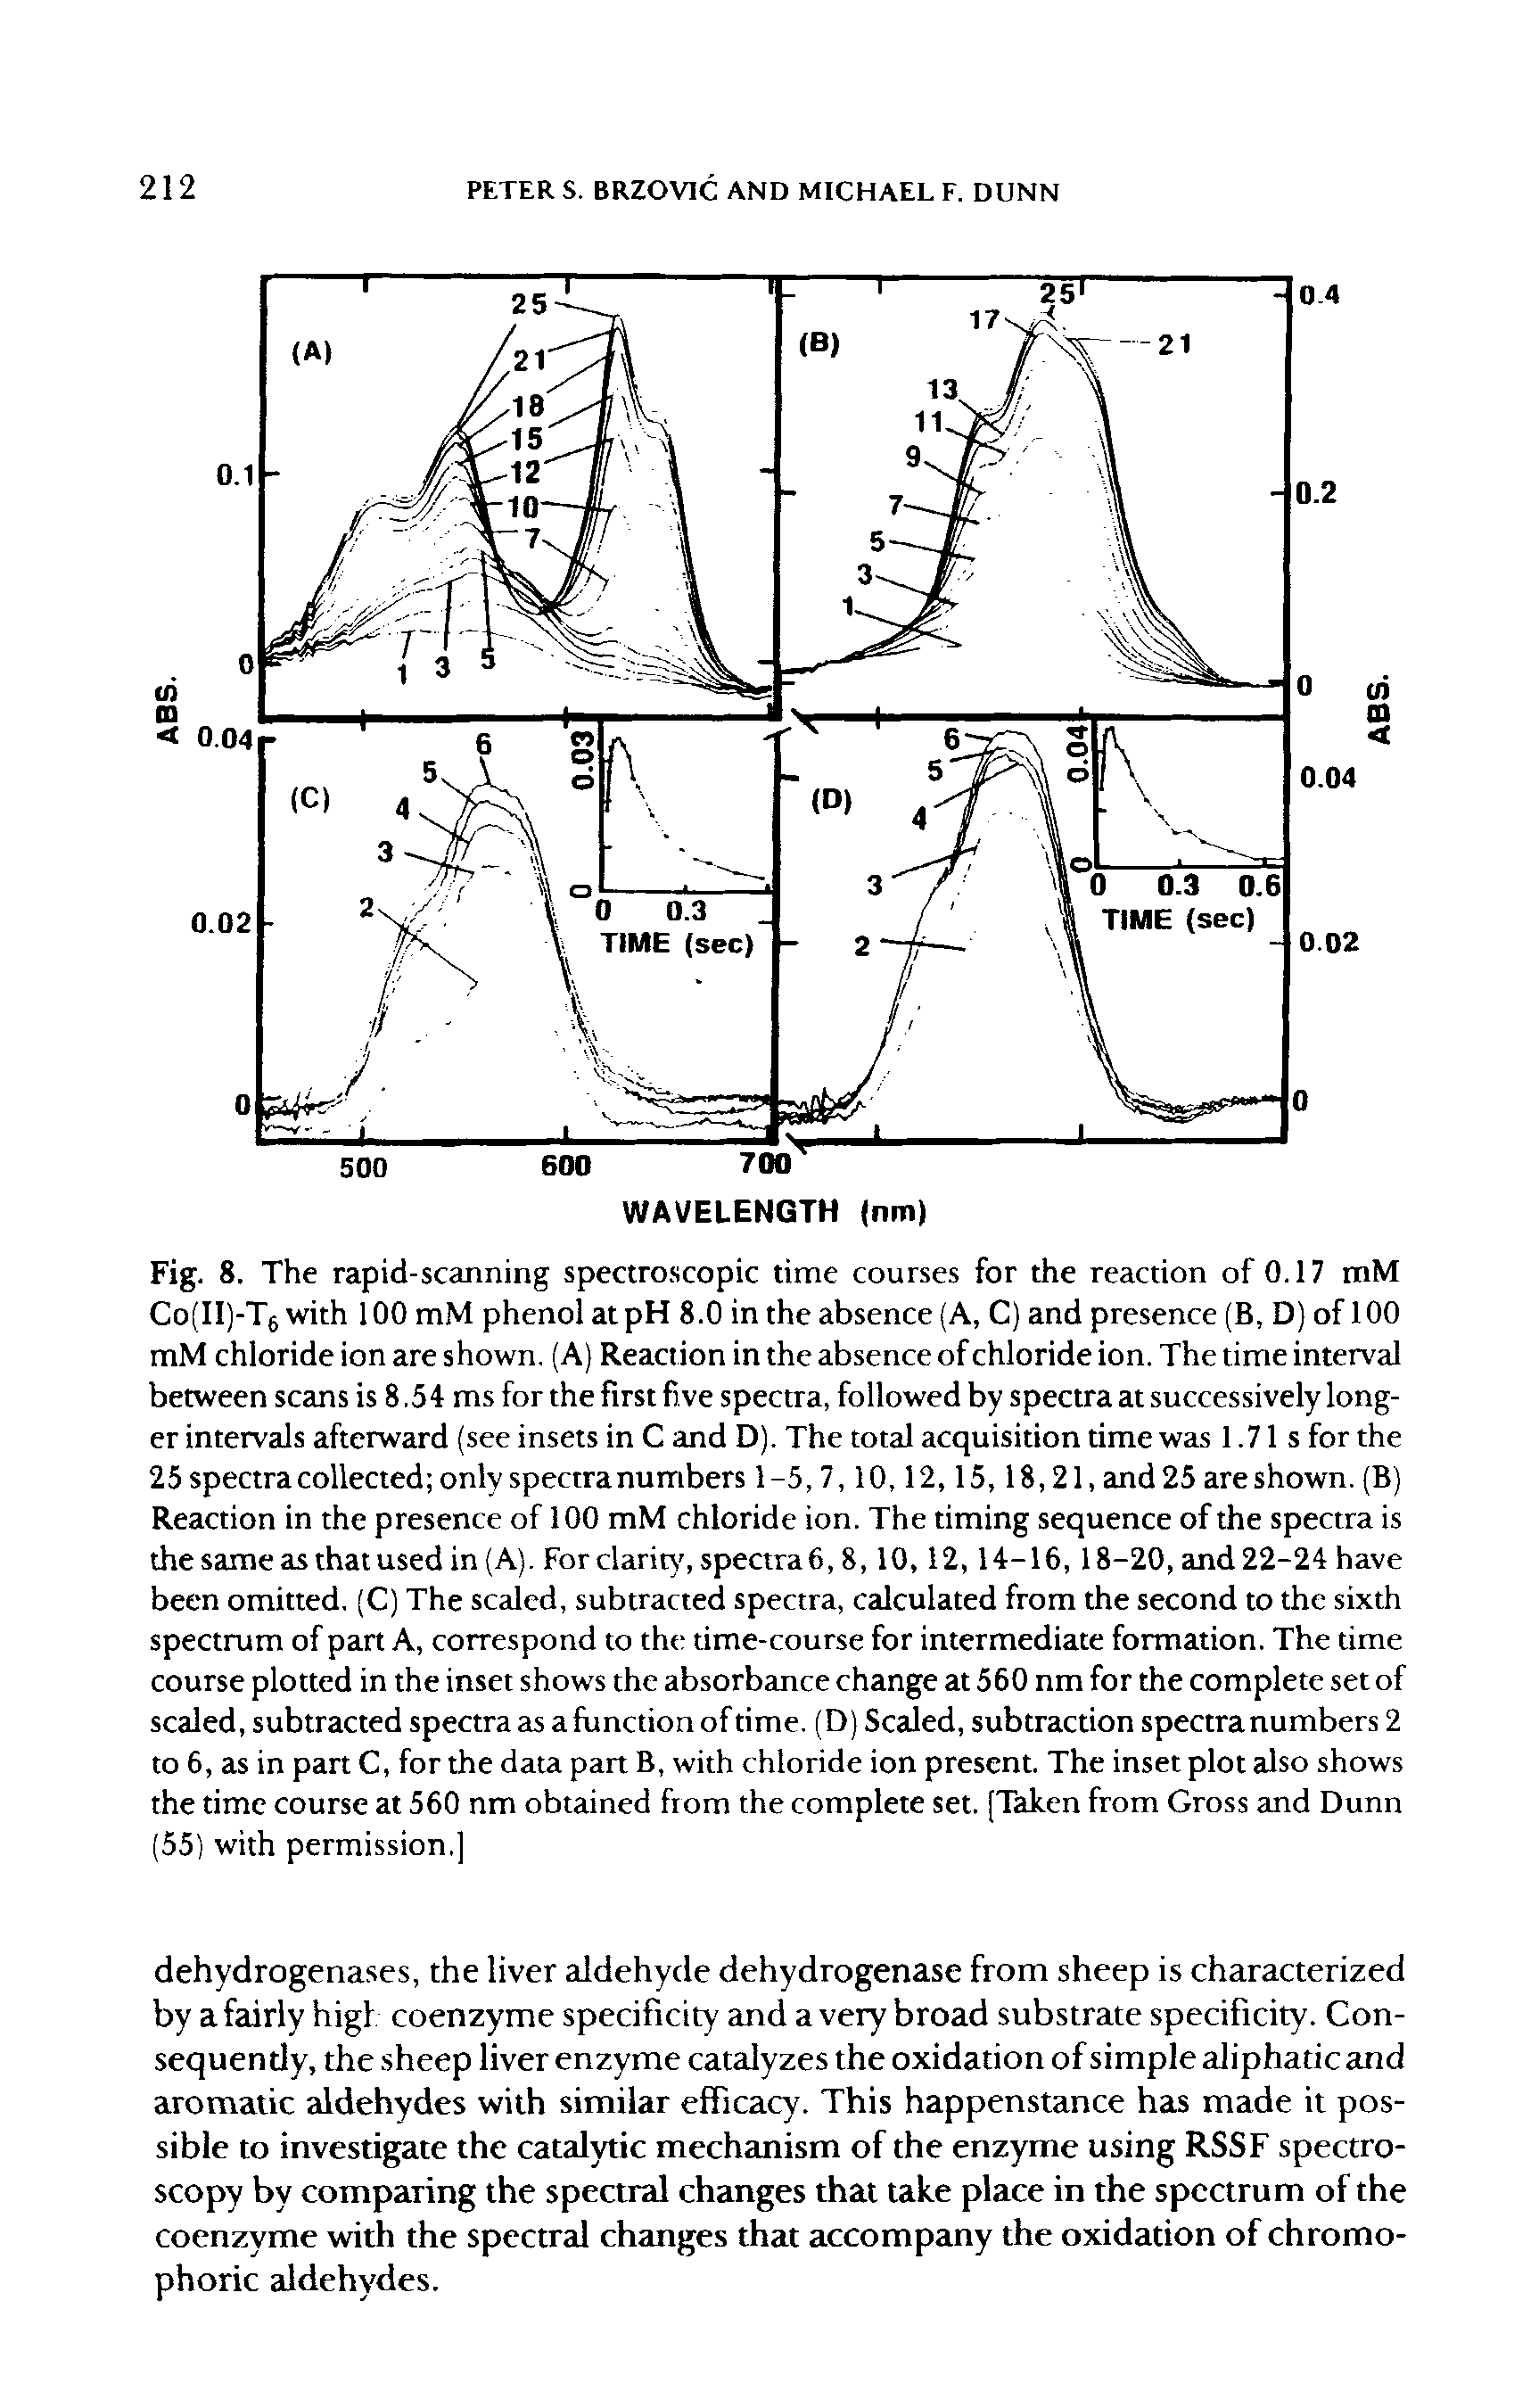 Fig. 8. The rapid-scanning spectroscopic time courses for the reaction of 0.17 mM Co(II)-T6 with 100 mM phenol at pH 8.0 in the absence (A, C) and presence (B, D) of 100 mM chloride ion are shown. (A) Reaction in the absence of chloride ion. The time interval between scans is 8.54 ms for the first five spectra, followed by spectra at successively longer intervals afterward (see insets in C and D). The total acquisition time was 1.71 s for the 25 spectra collected only spectra numbers 1-5,7,10,12,15,18,21, and 25 are shown. (B) Reaction in the presence of 100 mM chloride ion. The timing sequence of the spectra is the same as that used in (A). For clarity, spectra 6, 8,10,12,14-16, 18-20, and 22-24 have been omitted. (C) The scaled, subtracted spectra, calculated from the second to the sixth spectrum of part A, correspond to the time-course for intermediate formation. The time course plotted in the inset shows the absorbance change at 560 nm for the complete set of scaled, subtracted spectra as a function of time. (D) Scaled, subtraction spectra numbers 2 to 6, as in part C, for the data part B, with chloride ion present. The inset plot also shows the time course at 560 nm obtained from the complete set. (Taken from Gross and Dunn (55) with permission.]...